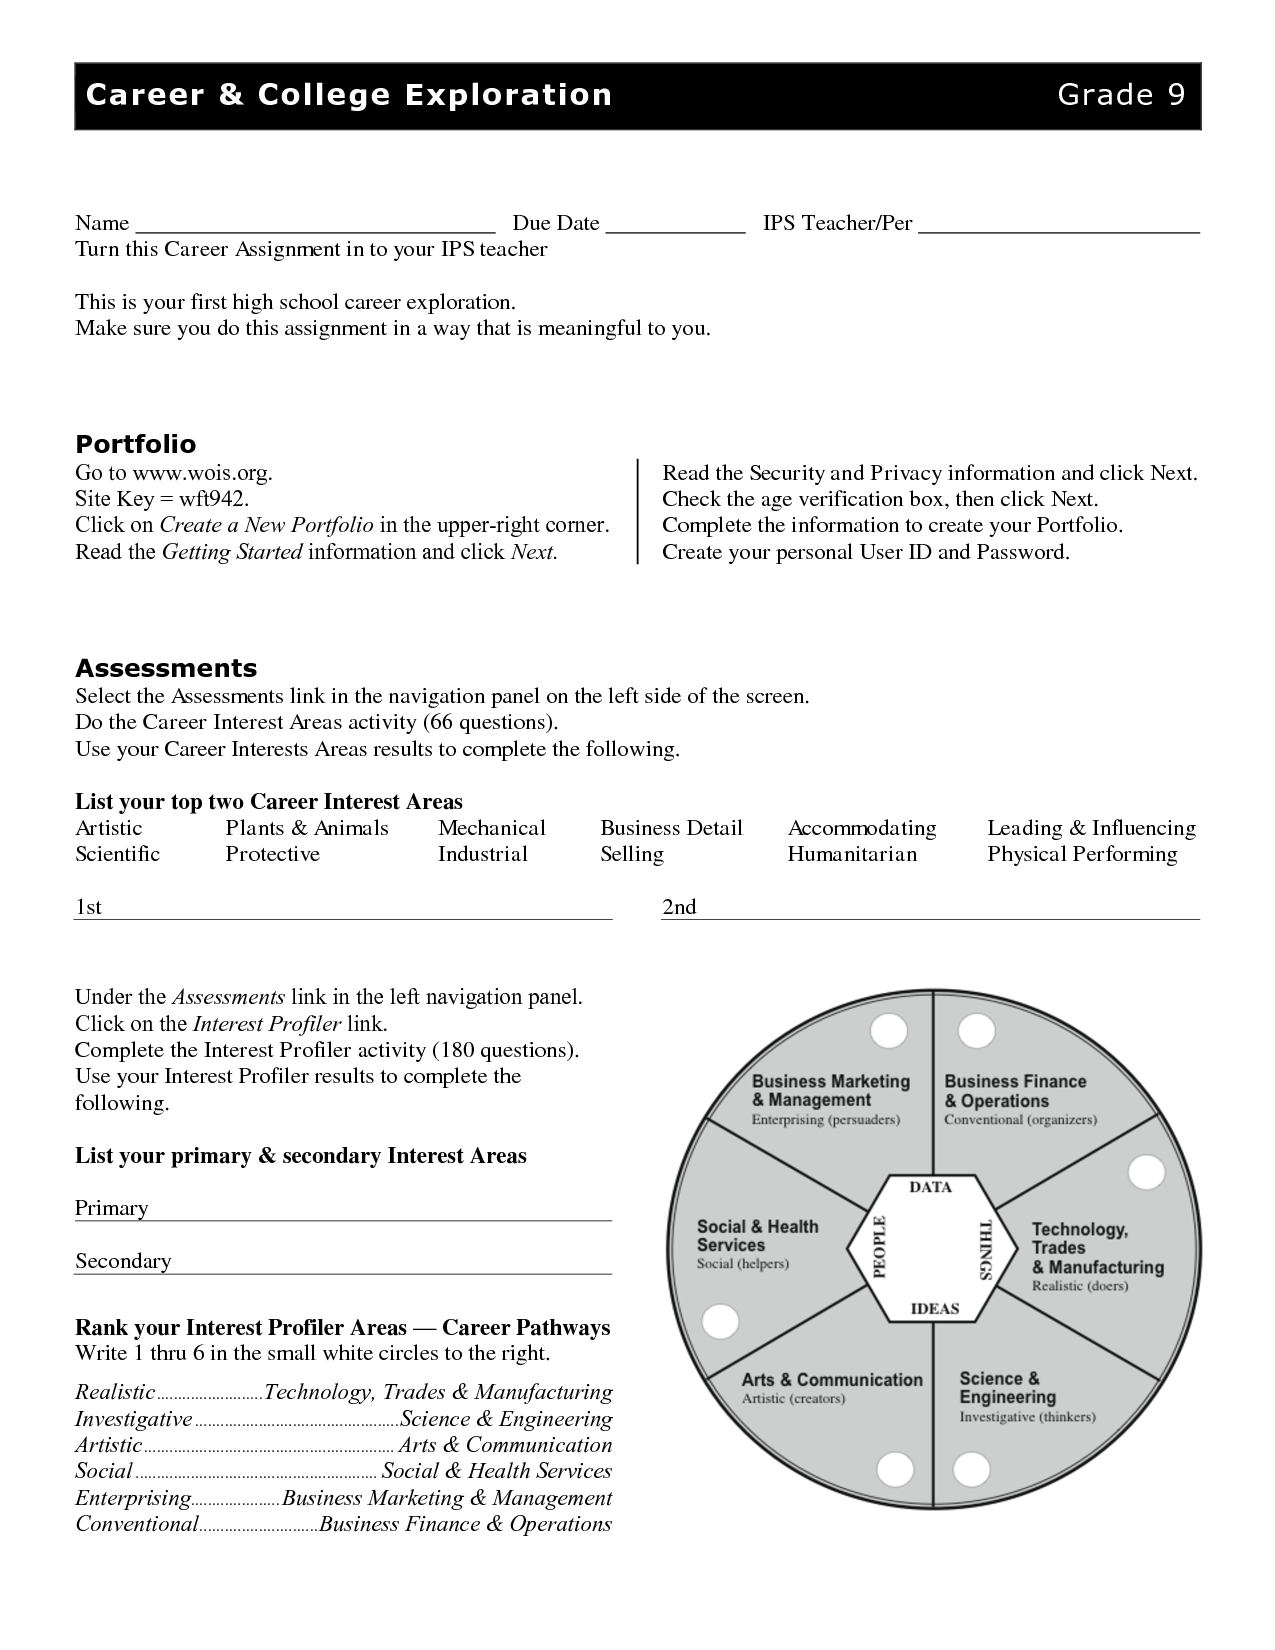 The Age of Exploration Worksheets Answer Key Image